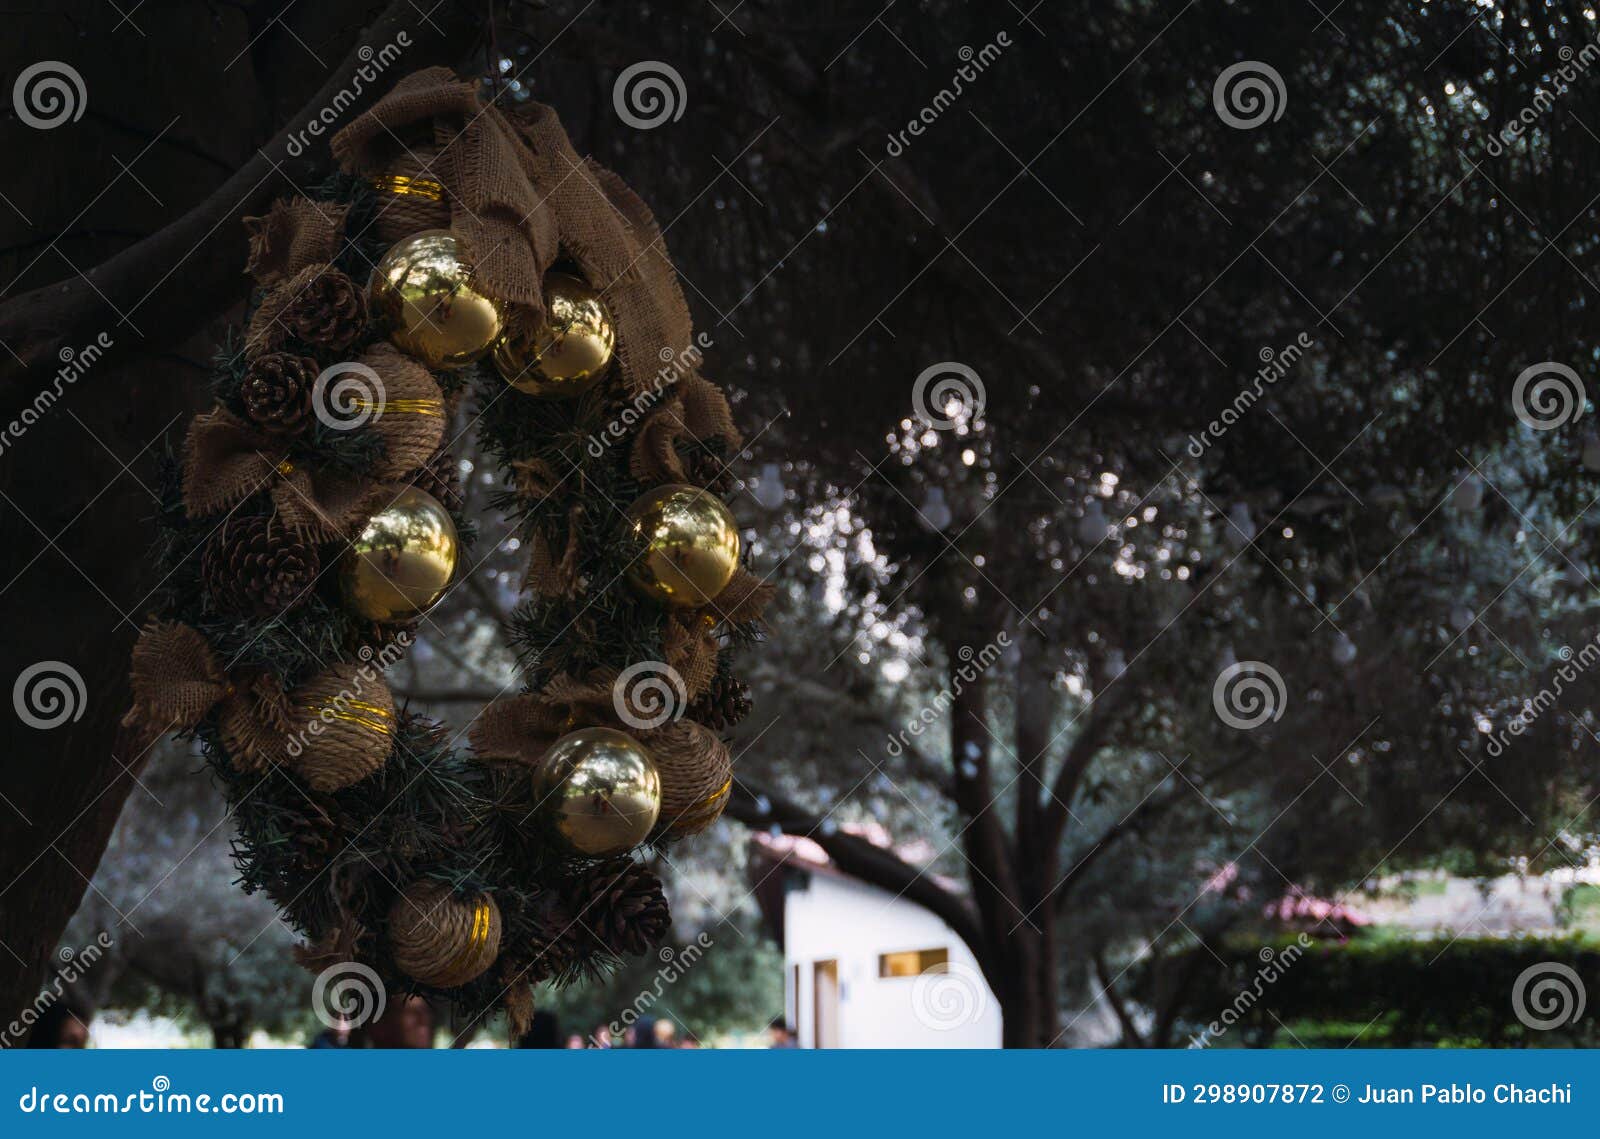 christmas wreath hanging from trees